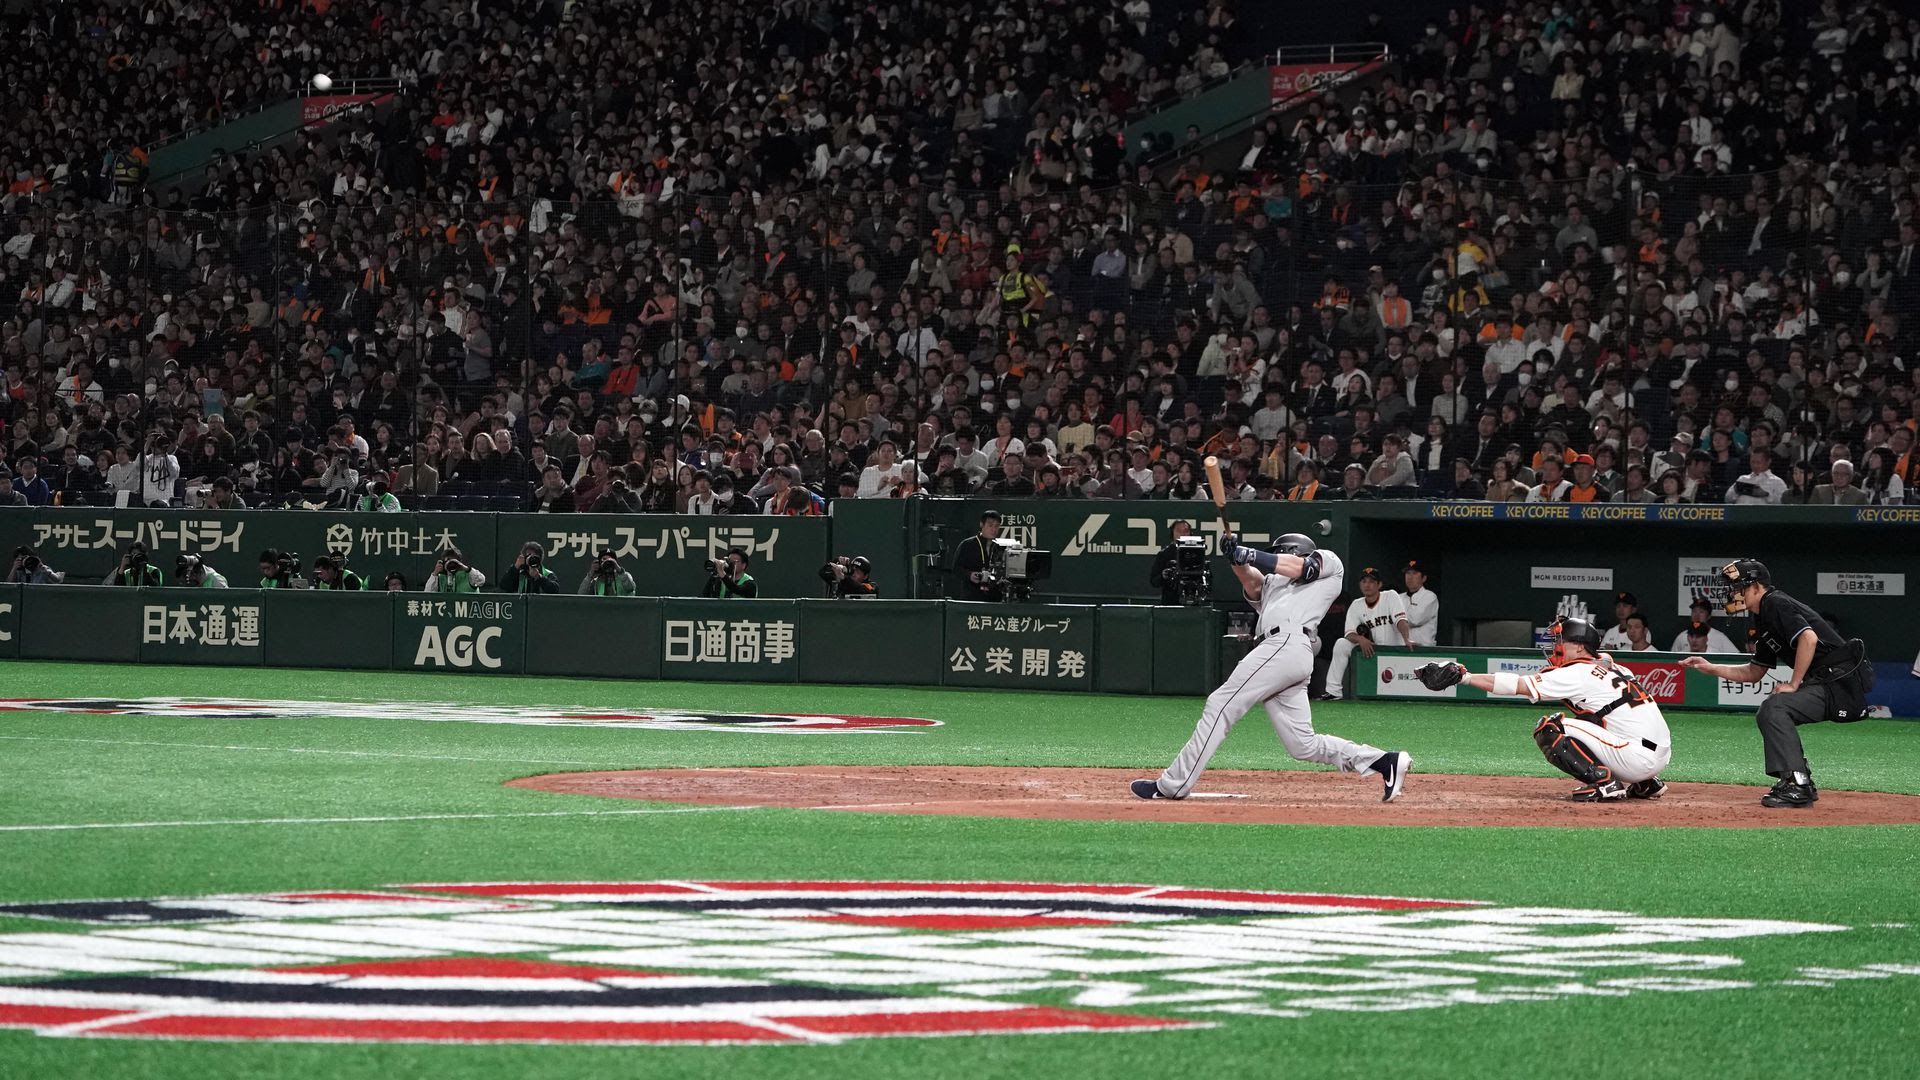 Mariners OF Mitch Haniger hits a two-run HR during a preseason friendly game against the Yomiuri Giants in Tokyo last March